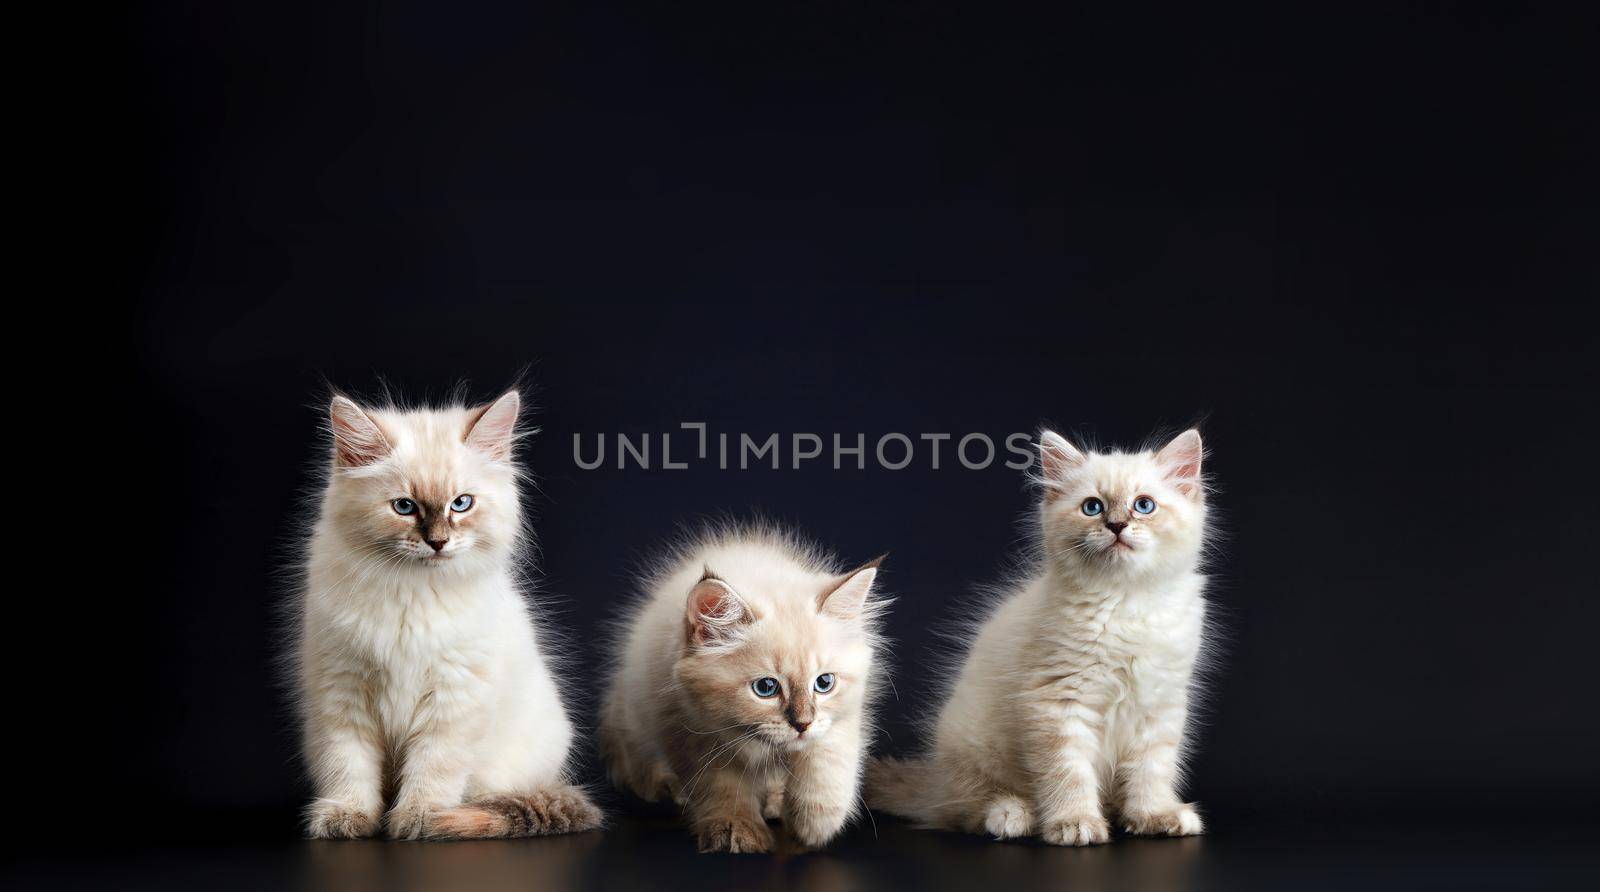 Such different babies - Three Funny kittens with bright blue eyes on a black background. Small fluffy kittens of the Neva masquerade cat (subspecies of the Siberian cat).